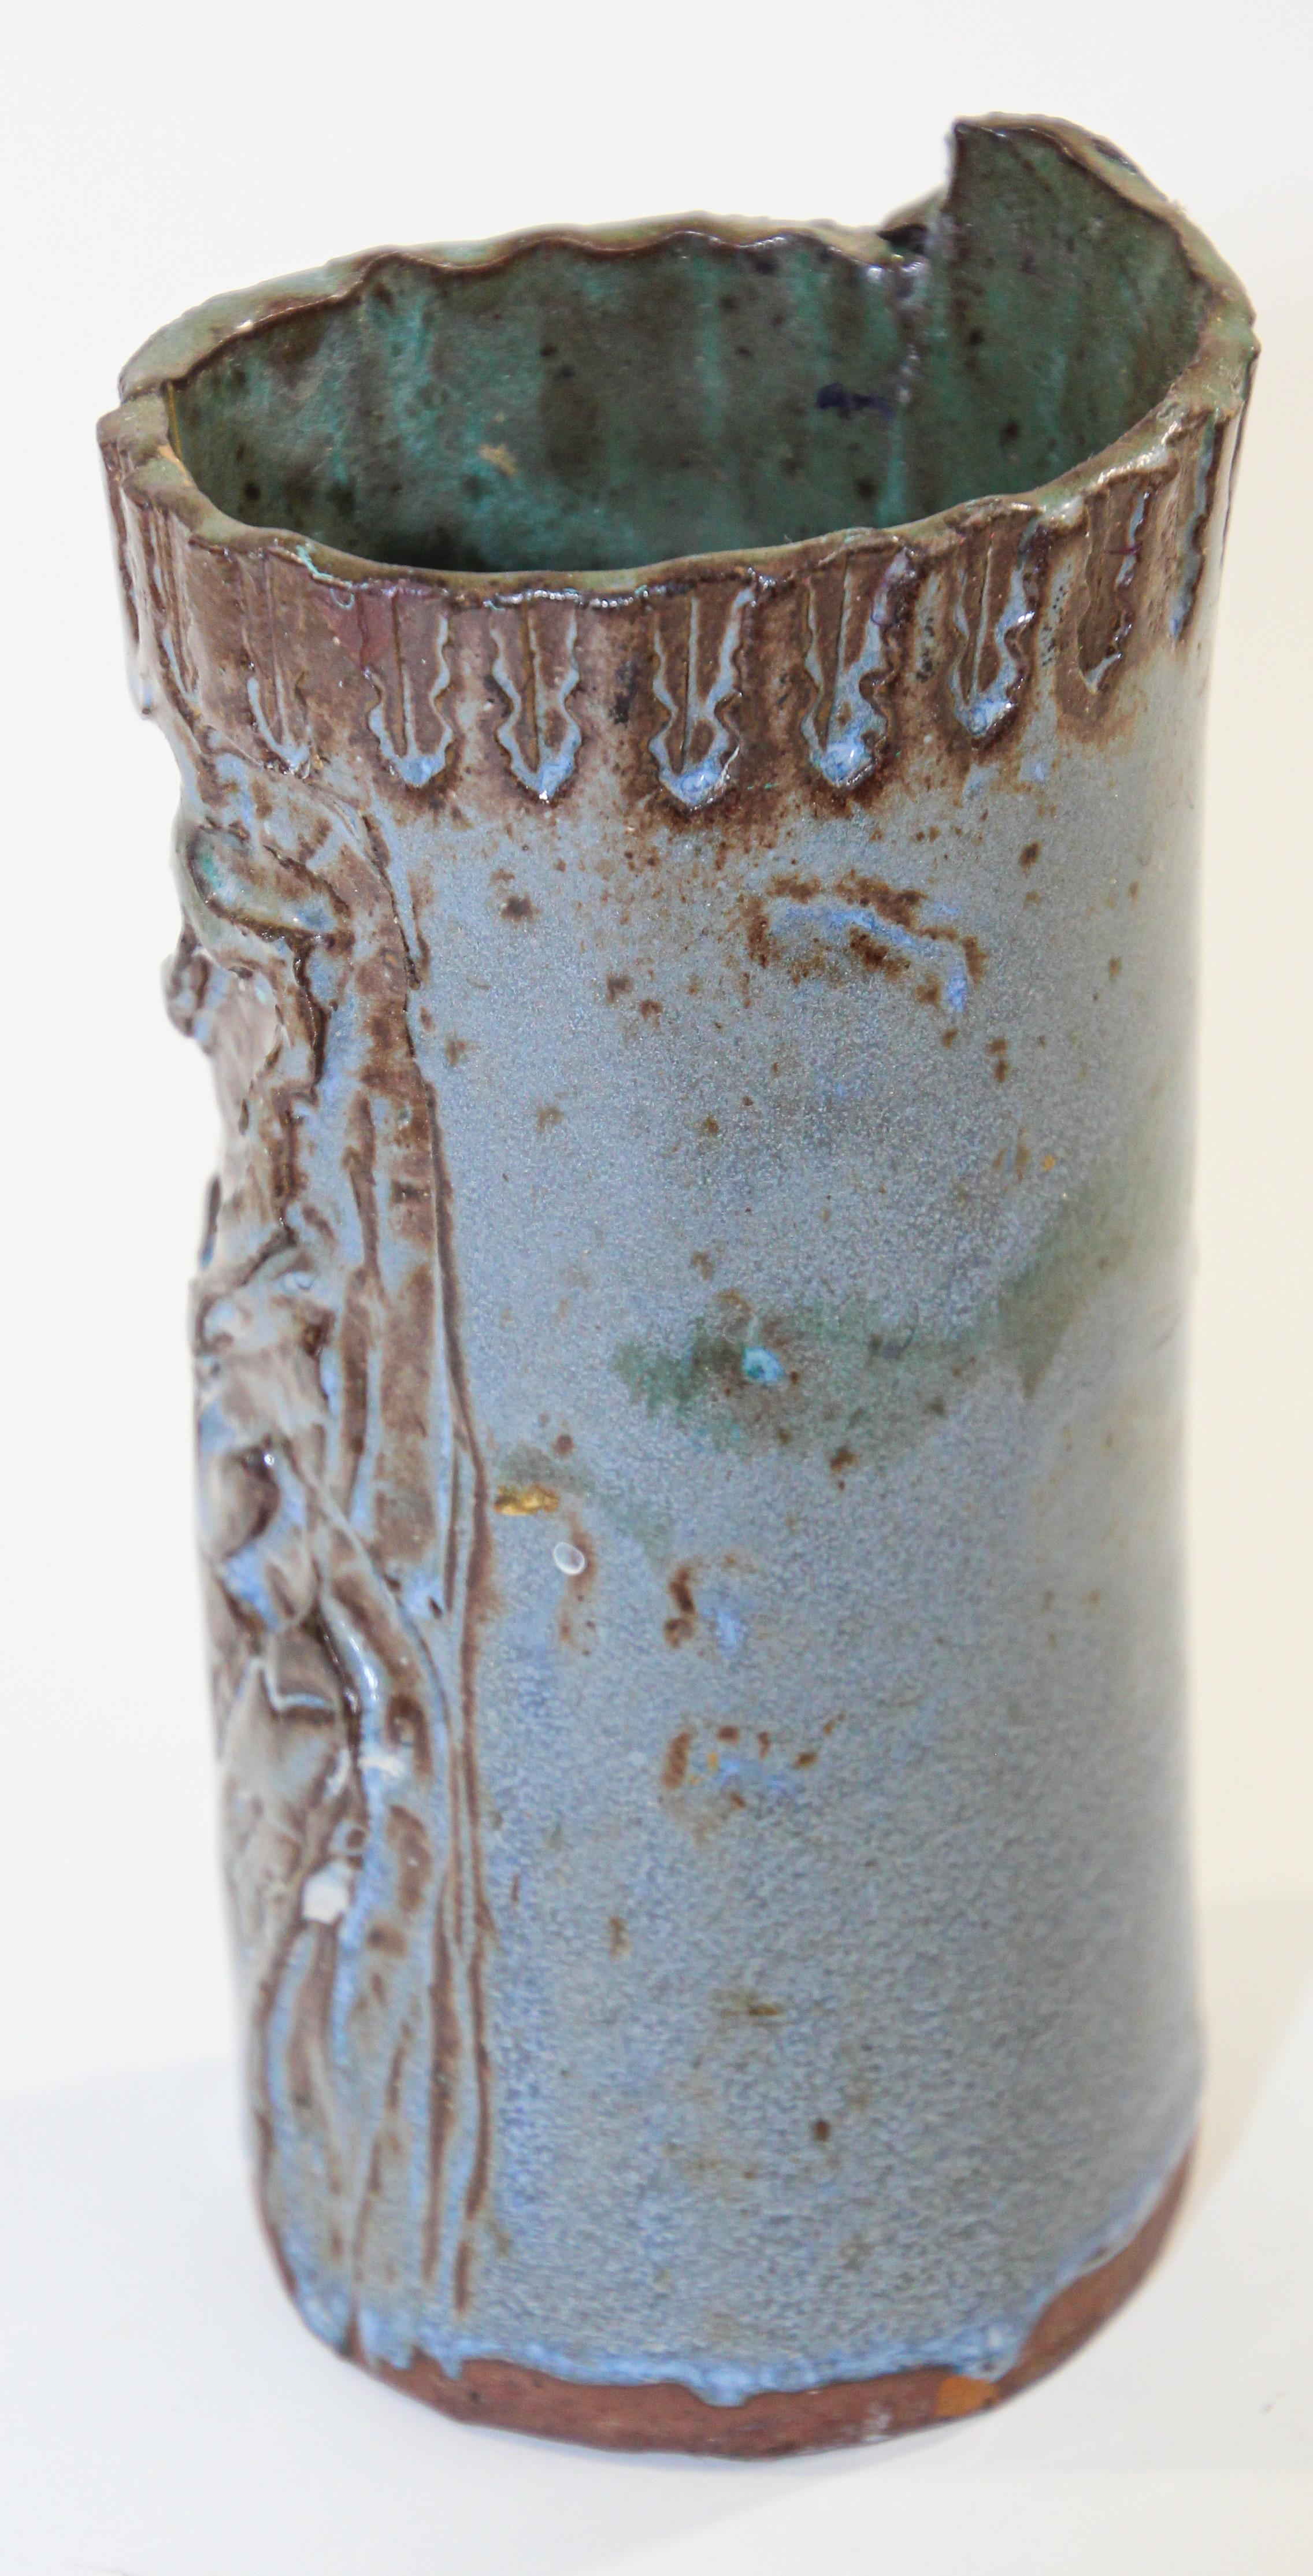 California Studio Organic Pottery Vessel Brush Pot Vase In Good Condition For Sale In North Hollywood, CA